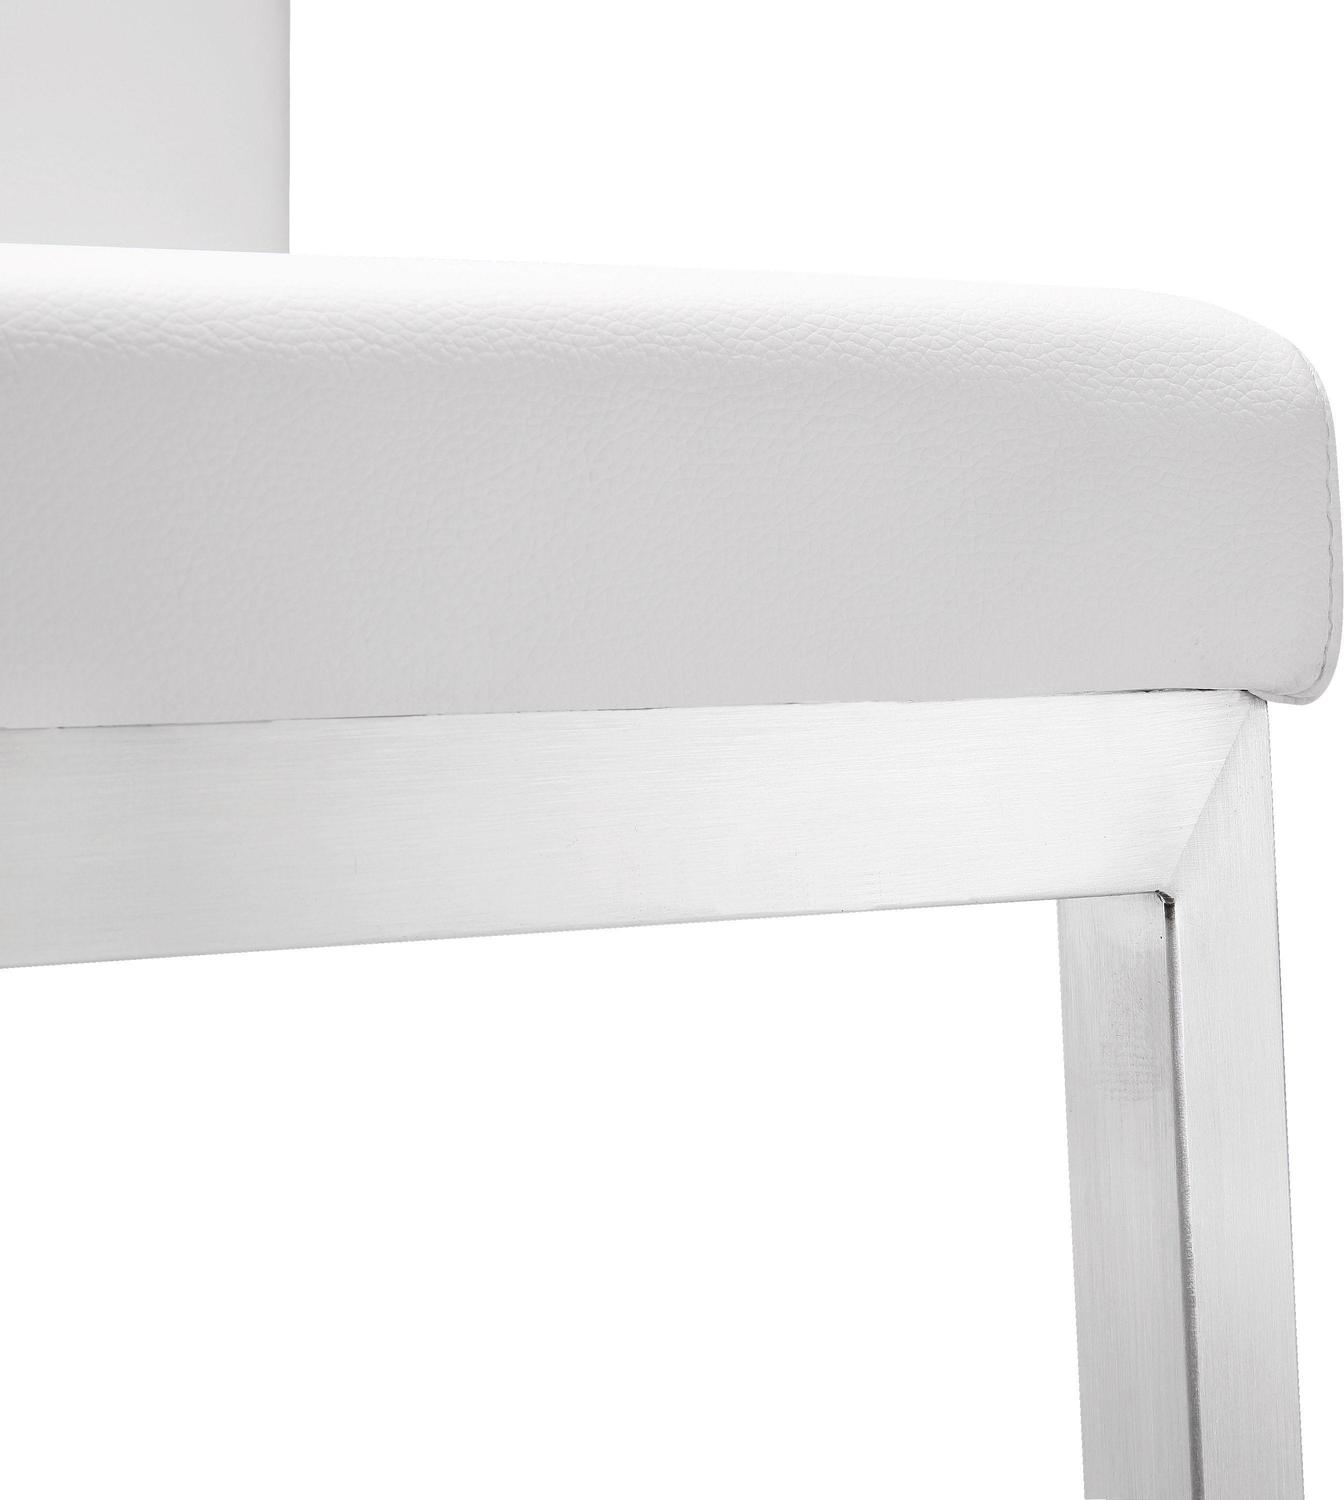 bar height barstools with backs Tov Furniture Stools Bar Chairs and Stools White